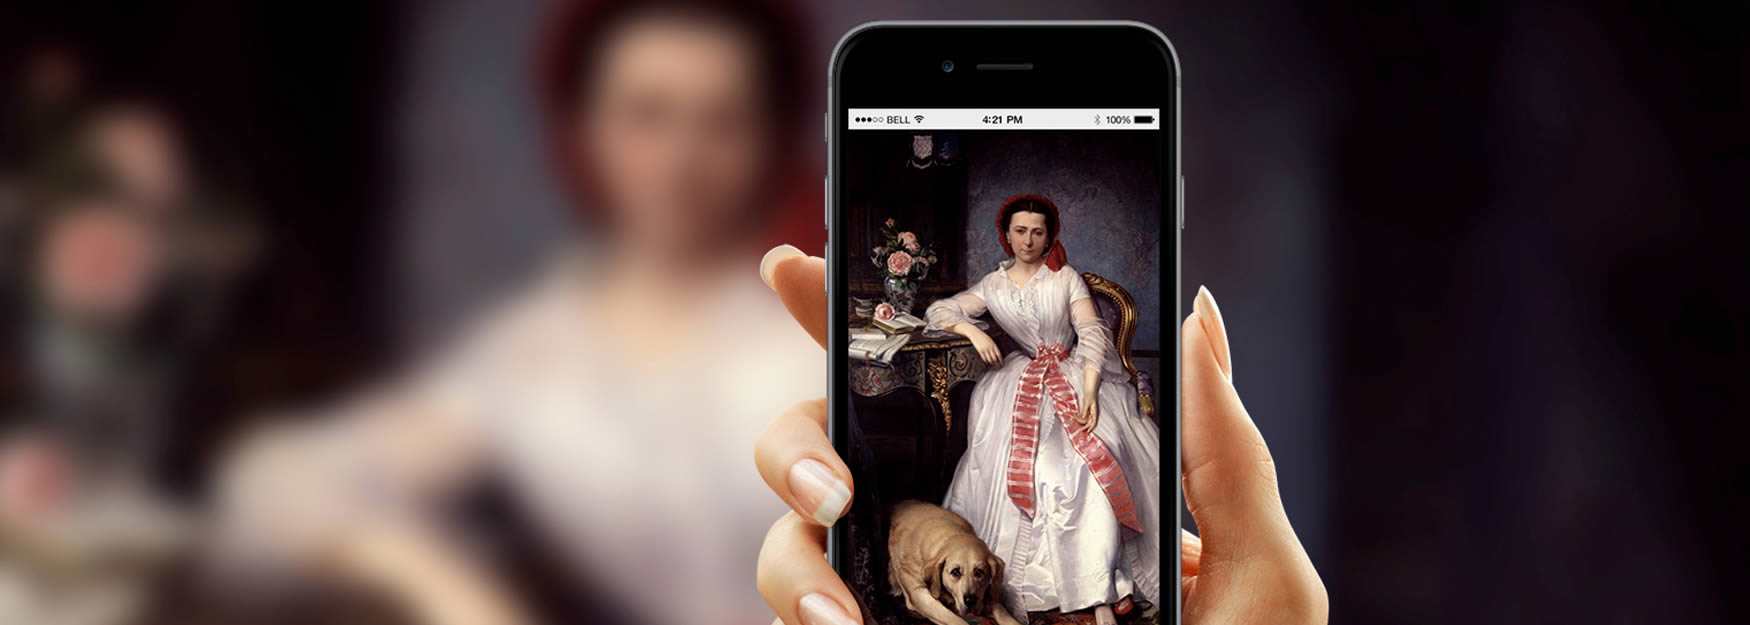 Smartify - Scan the art, get the story!